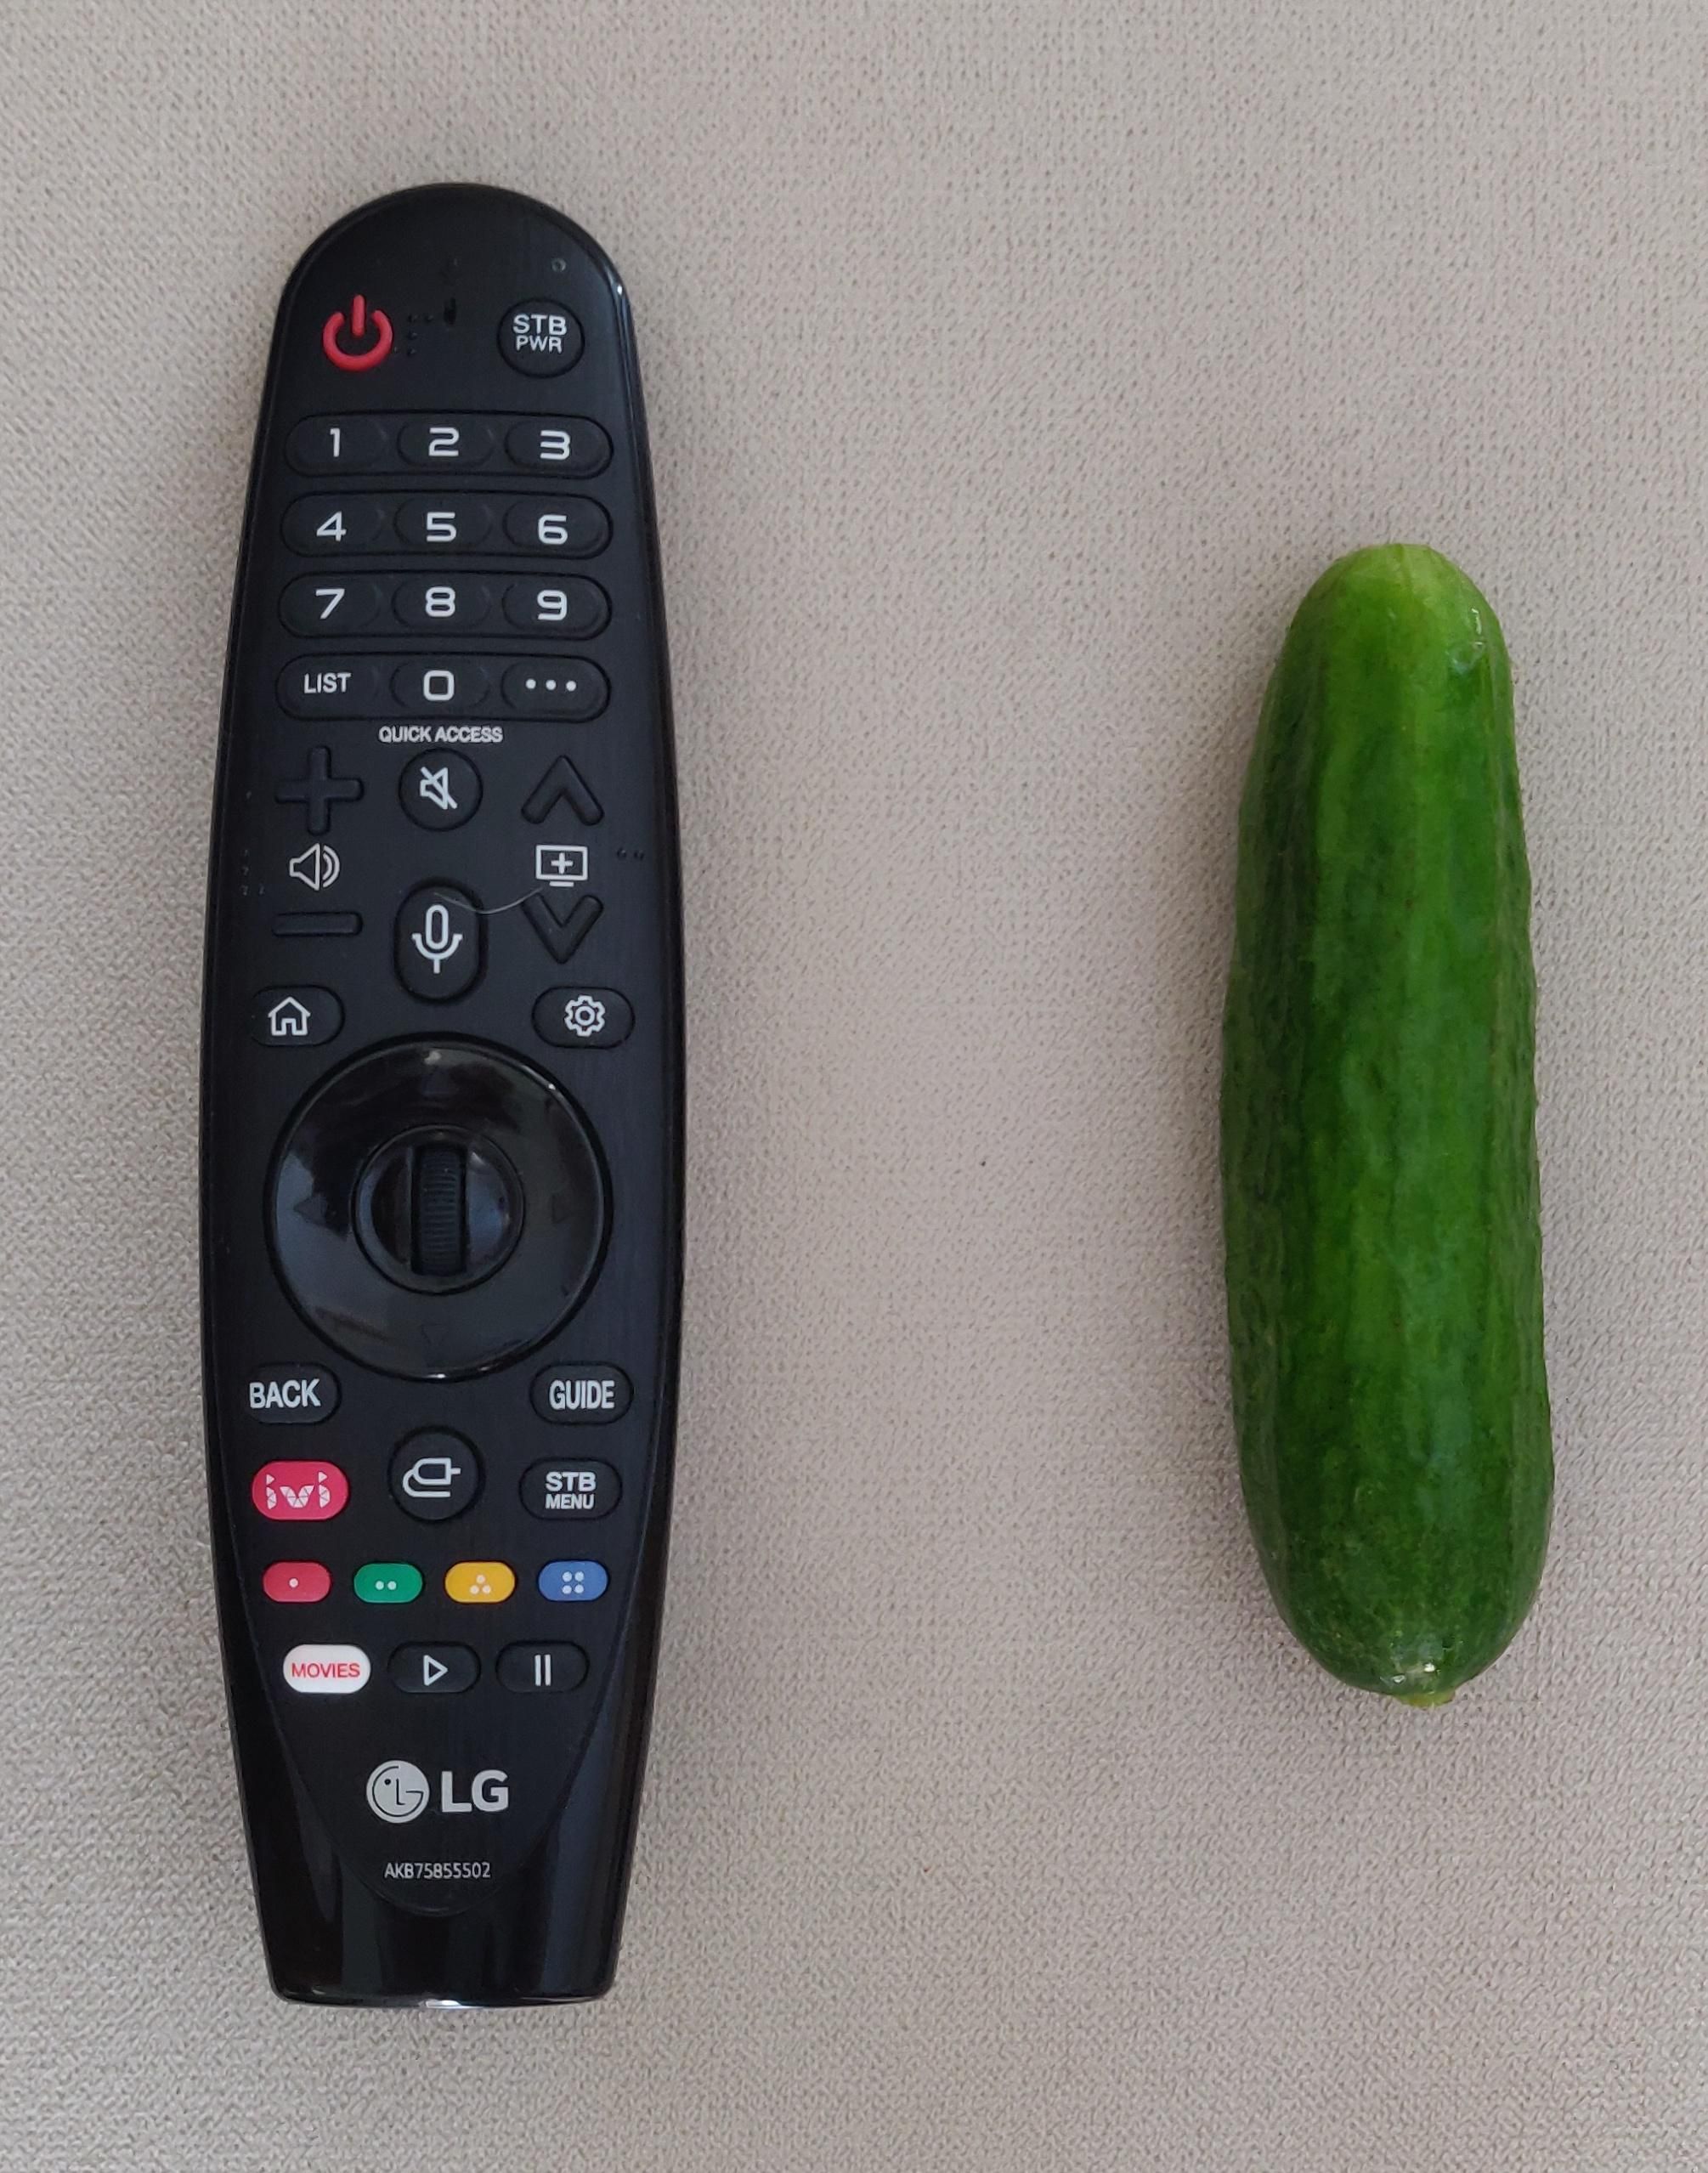 My wife asked me to buy medium sized cucumbers. This is what I bought, she said it's small...